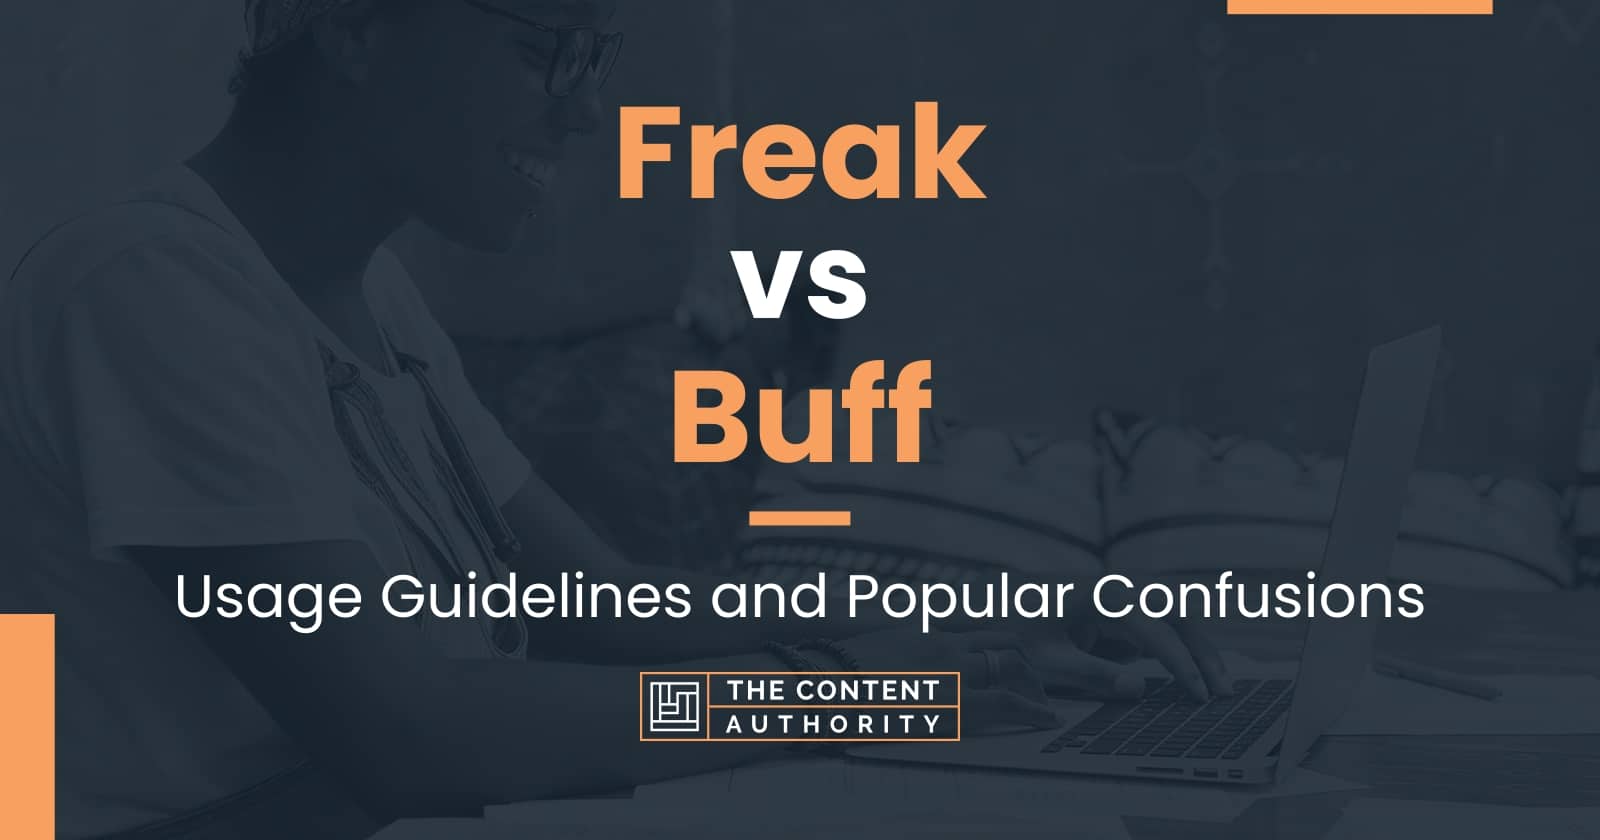 Freak vs Buff: Usage Guidelines and Popular Confusions